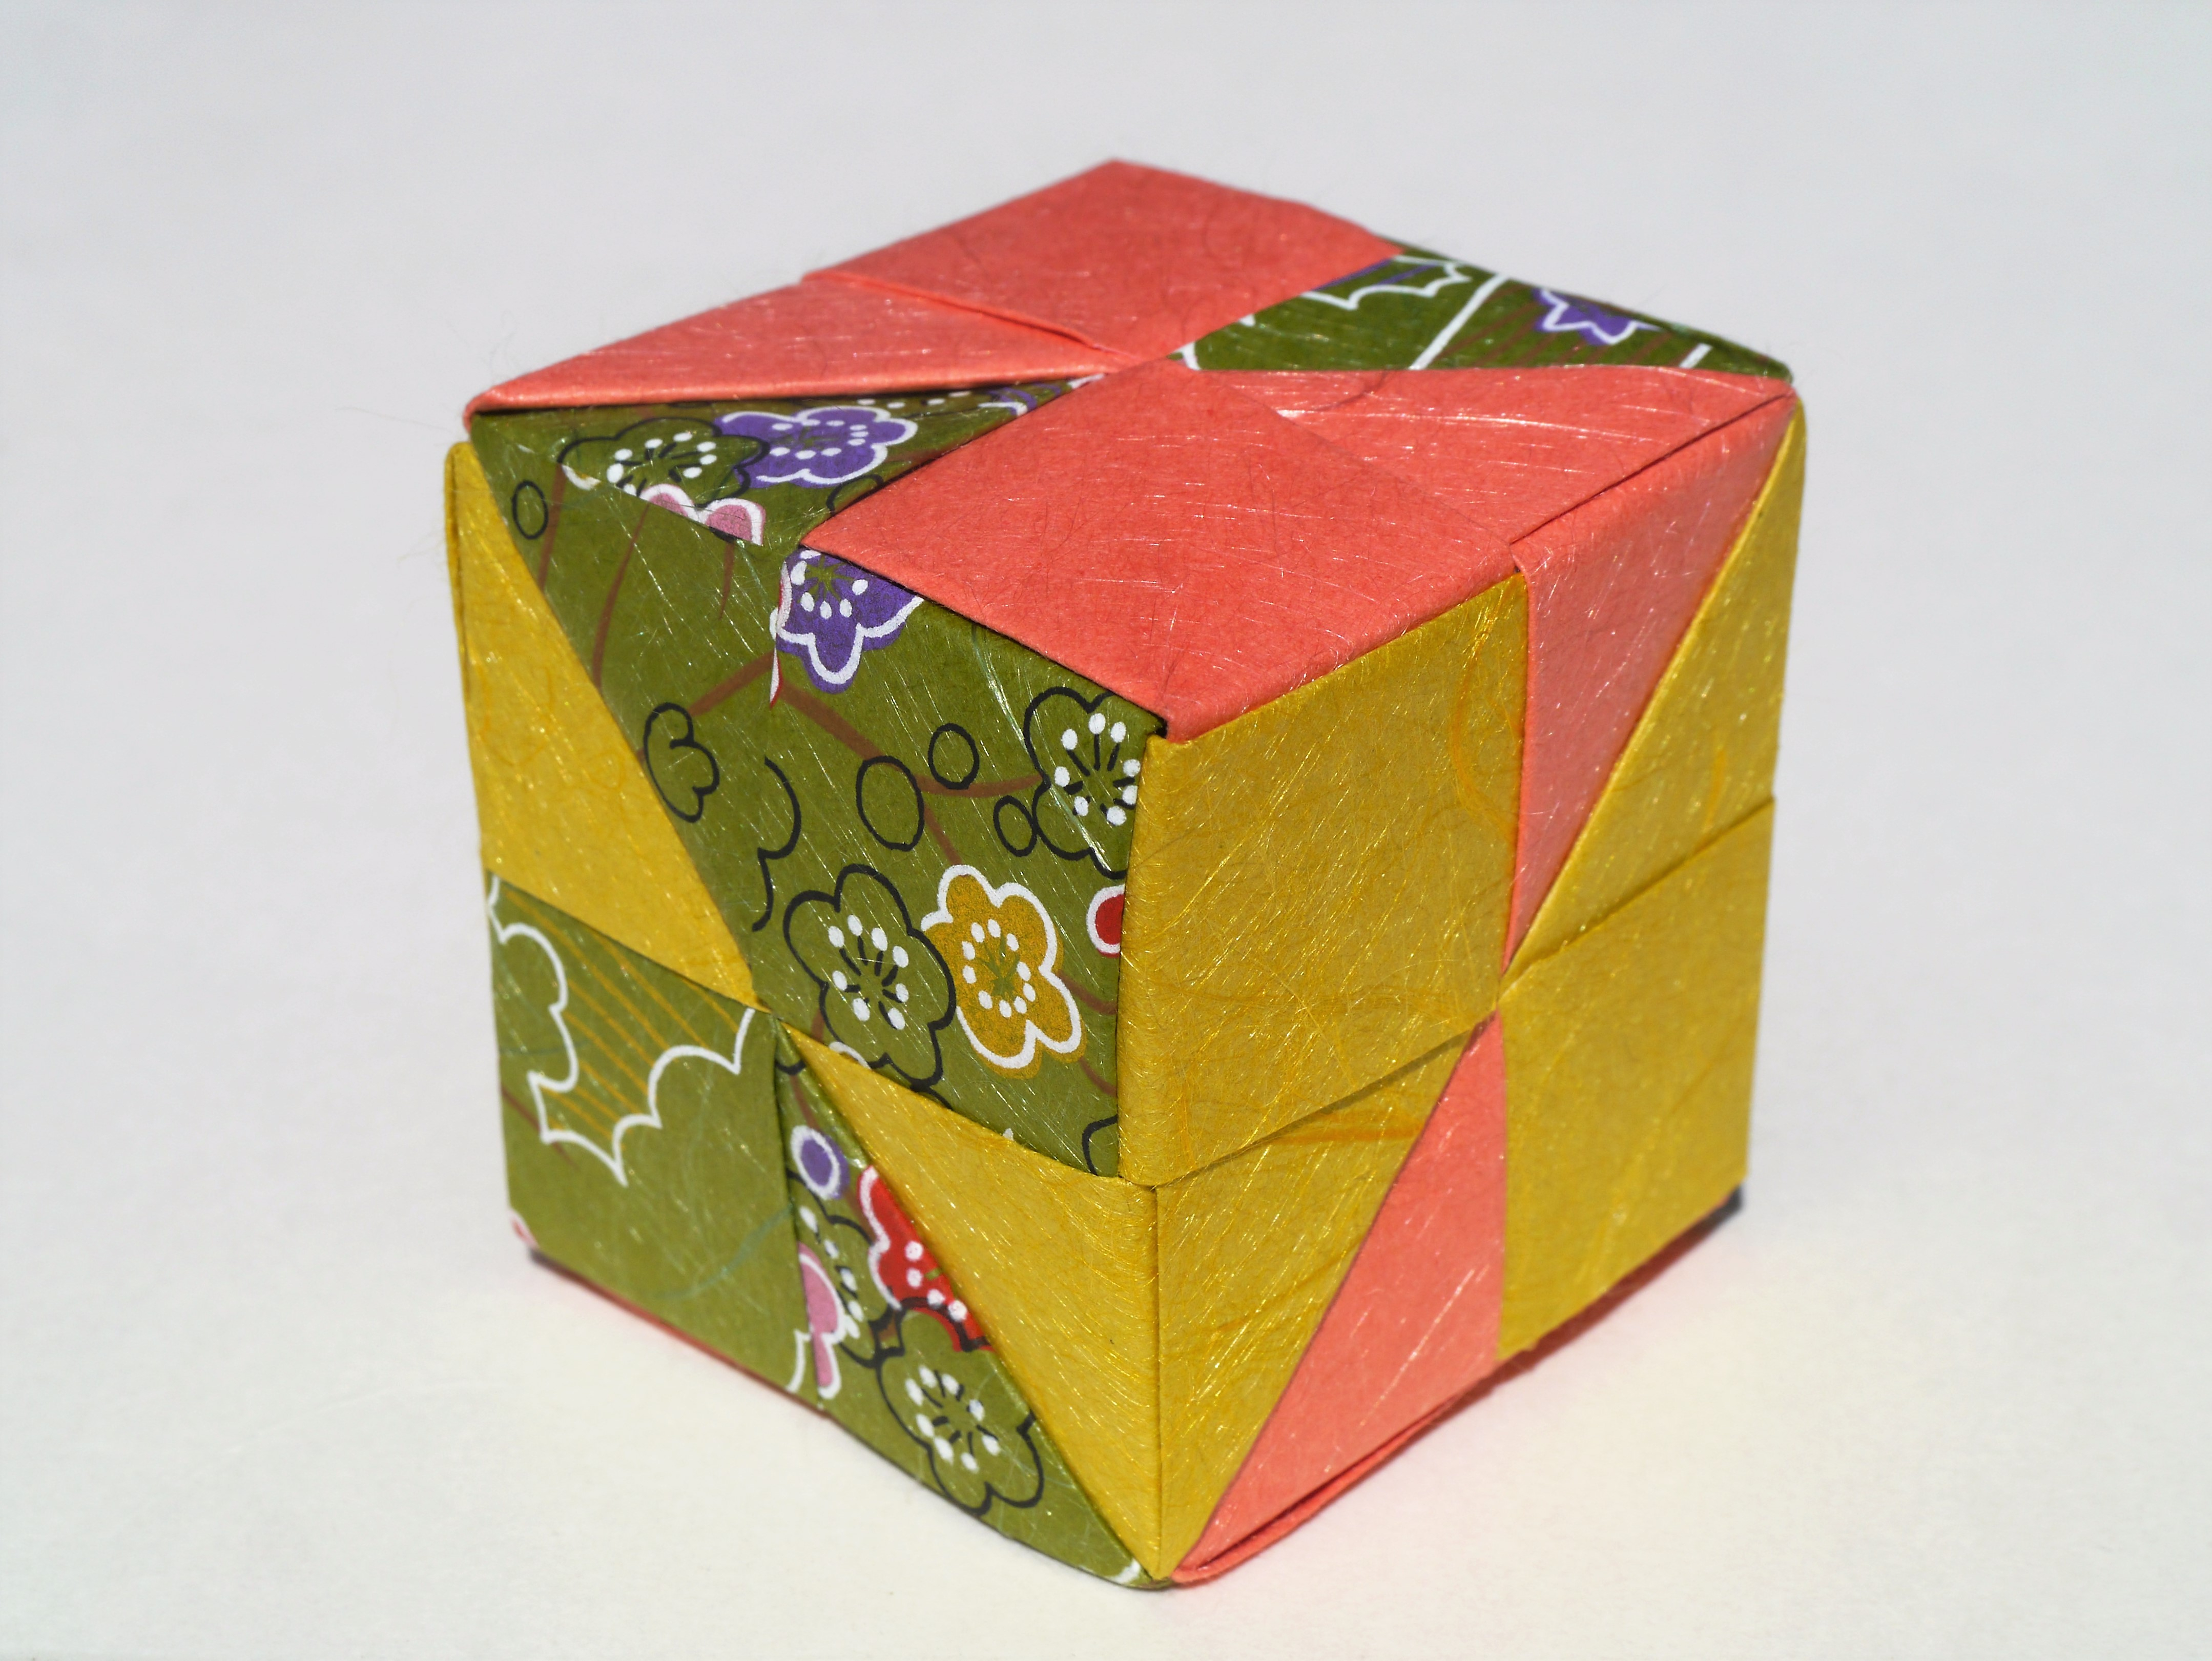 Origami Cube Instructions How To Make An Origami Cube In 18 Easy Steps From Japan Blog